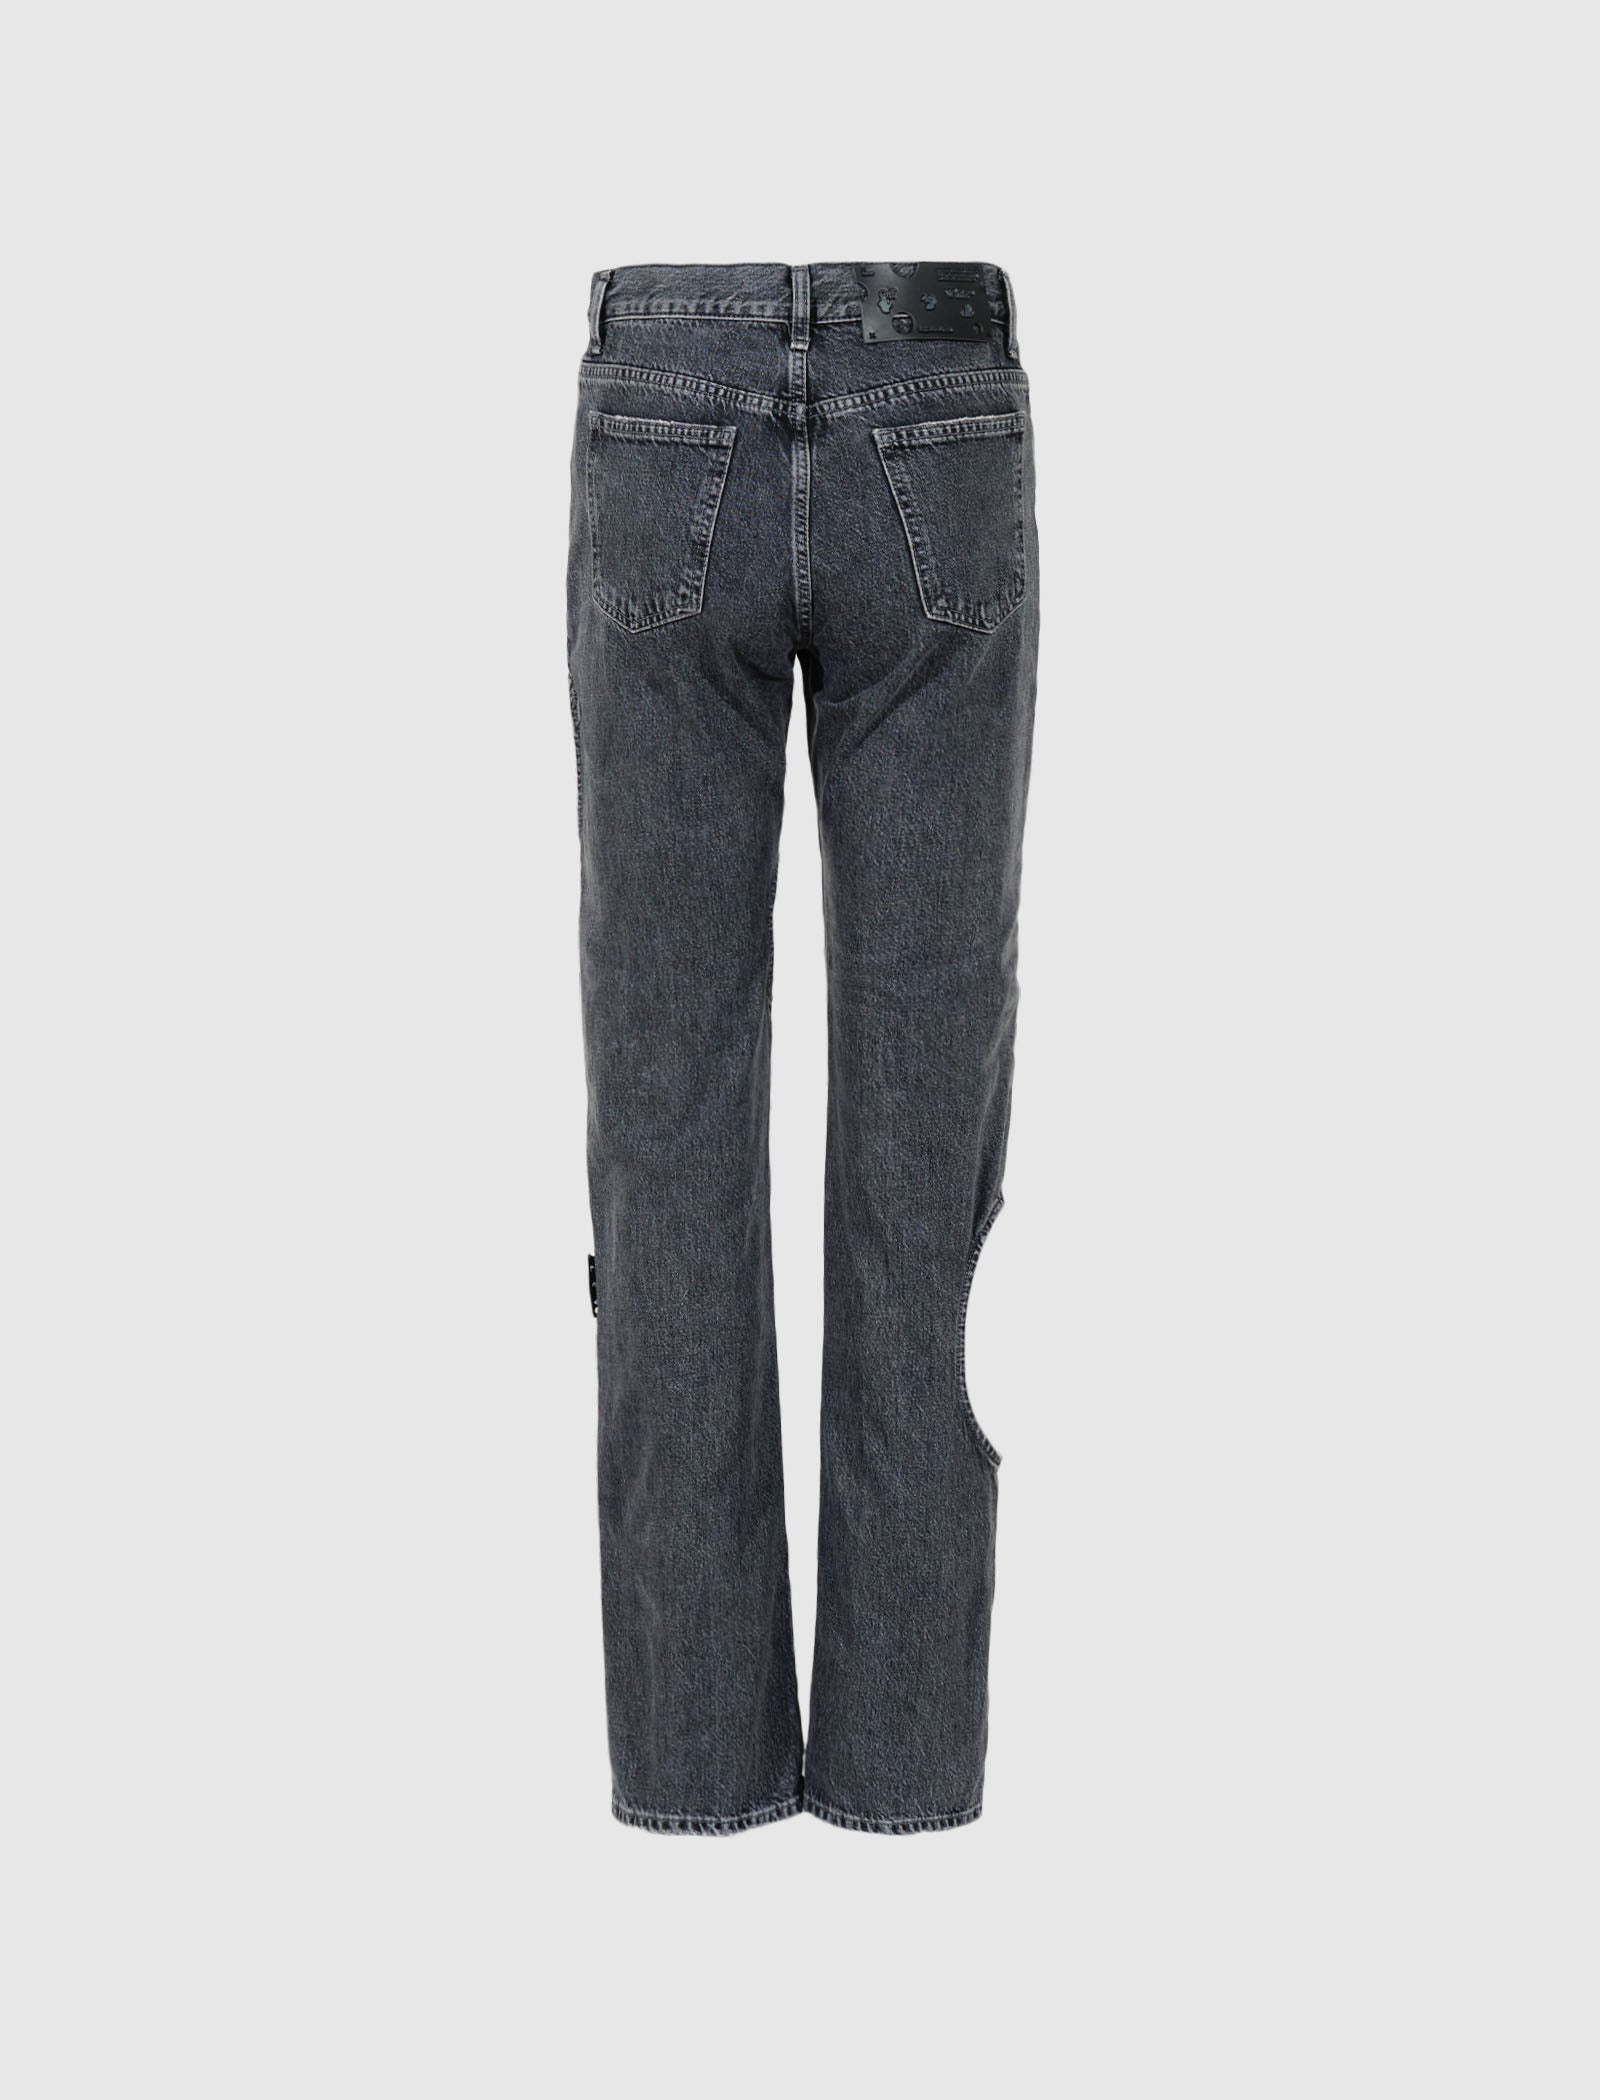 OFF-WHITE WOMEN'S METEOR COOL BAGGY JEANS